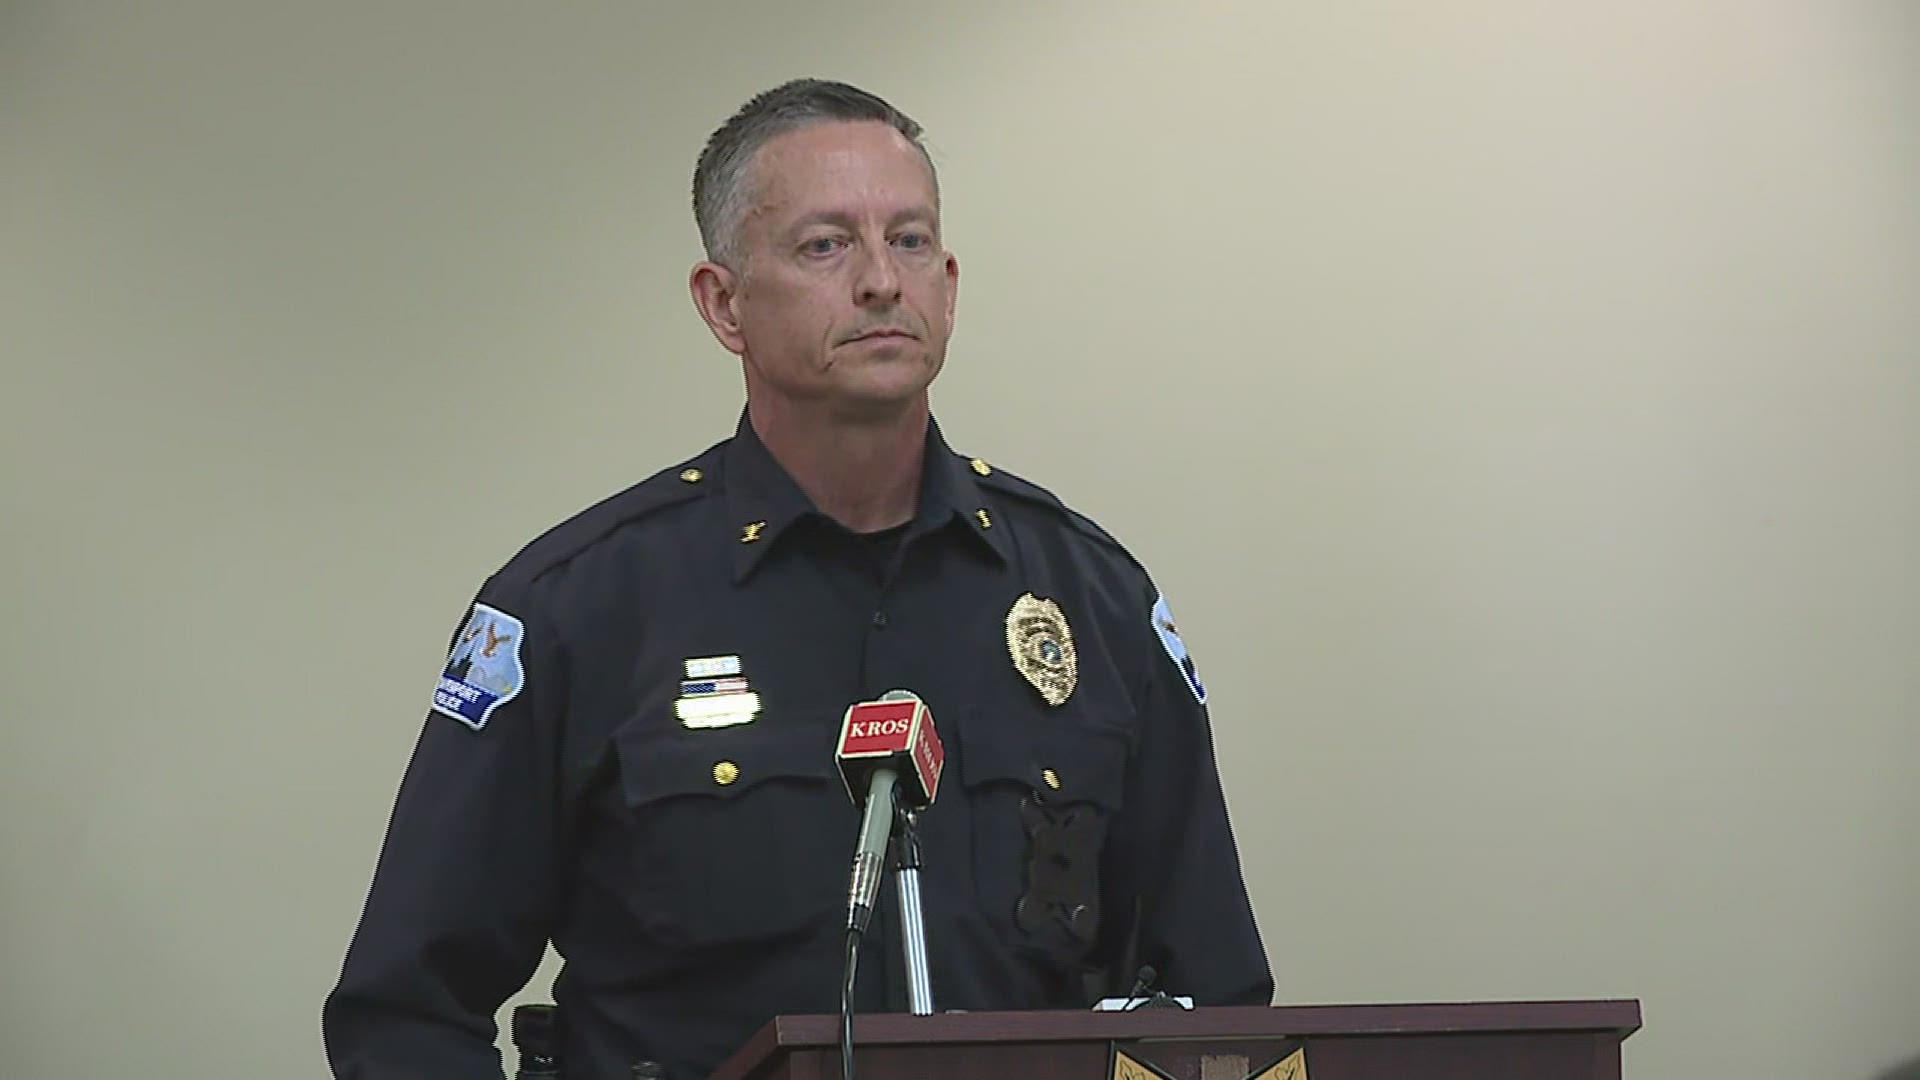 Authorities held a press conference regarding human remains found north of DeWitt, Iowa.